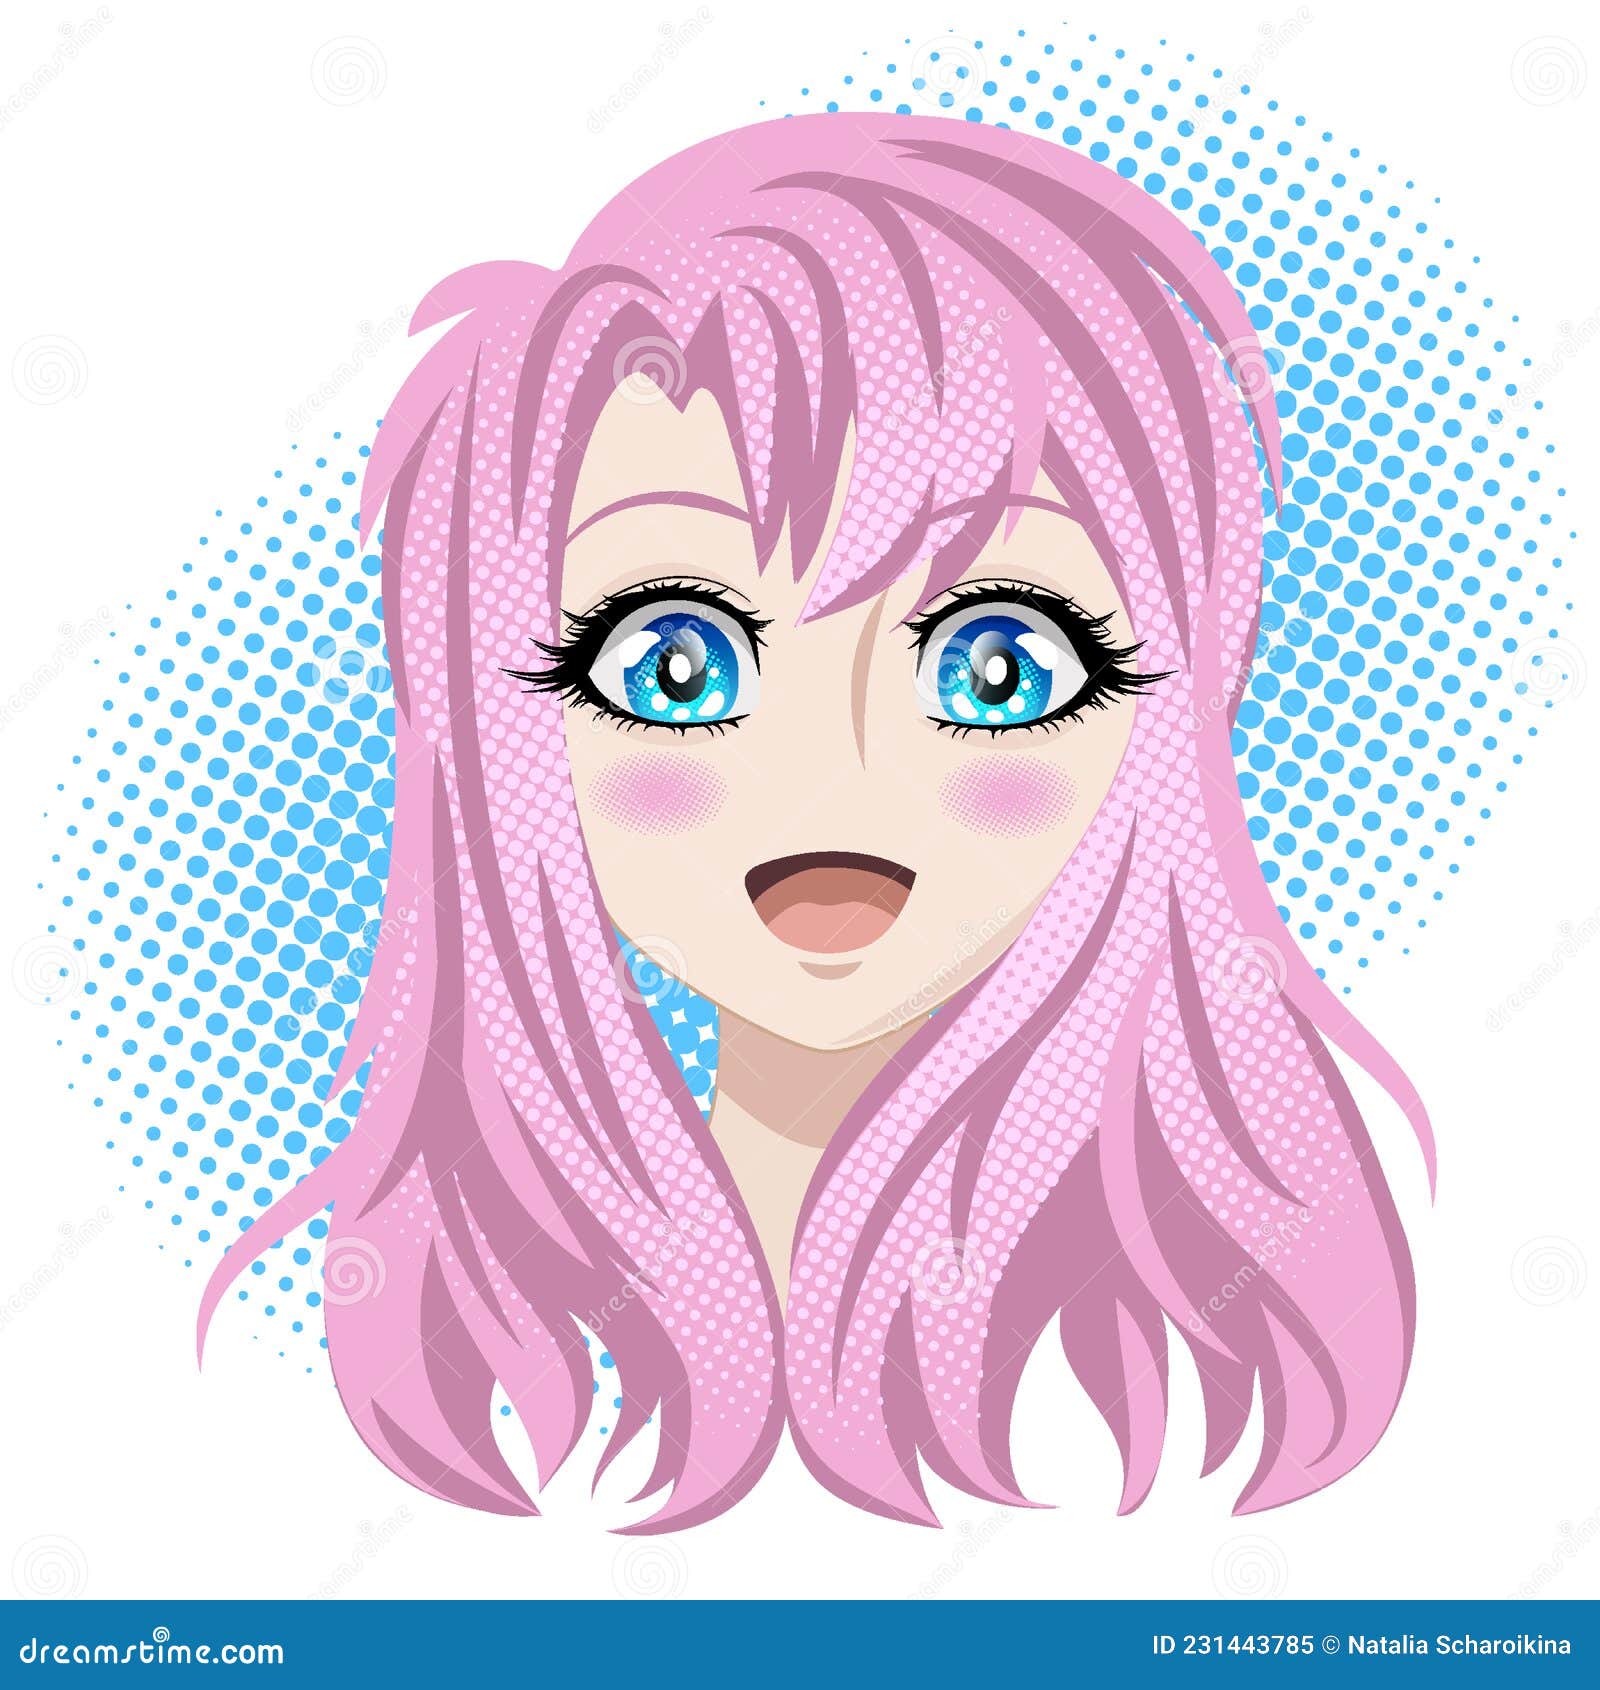 Cute anime girl with purple eyes and pink hair Vector Image